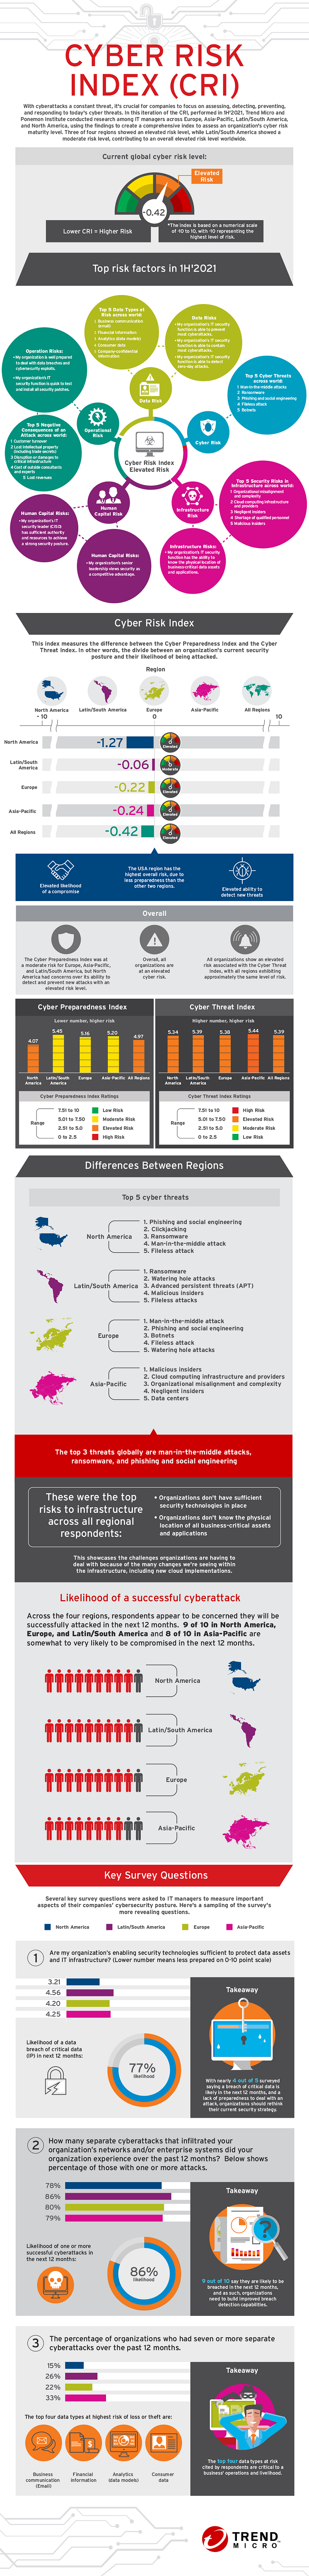 Cyber_Risk_Index_Infographic.png